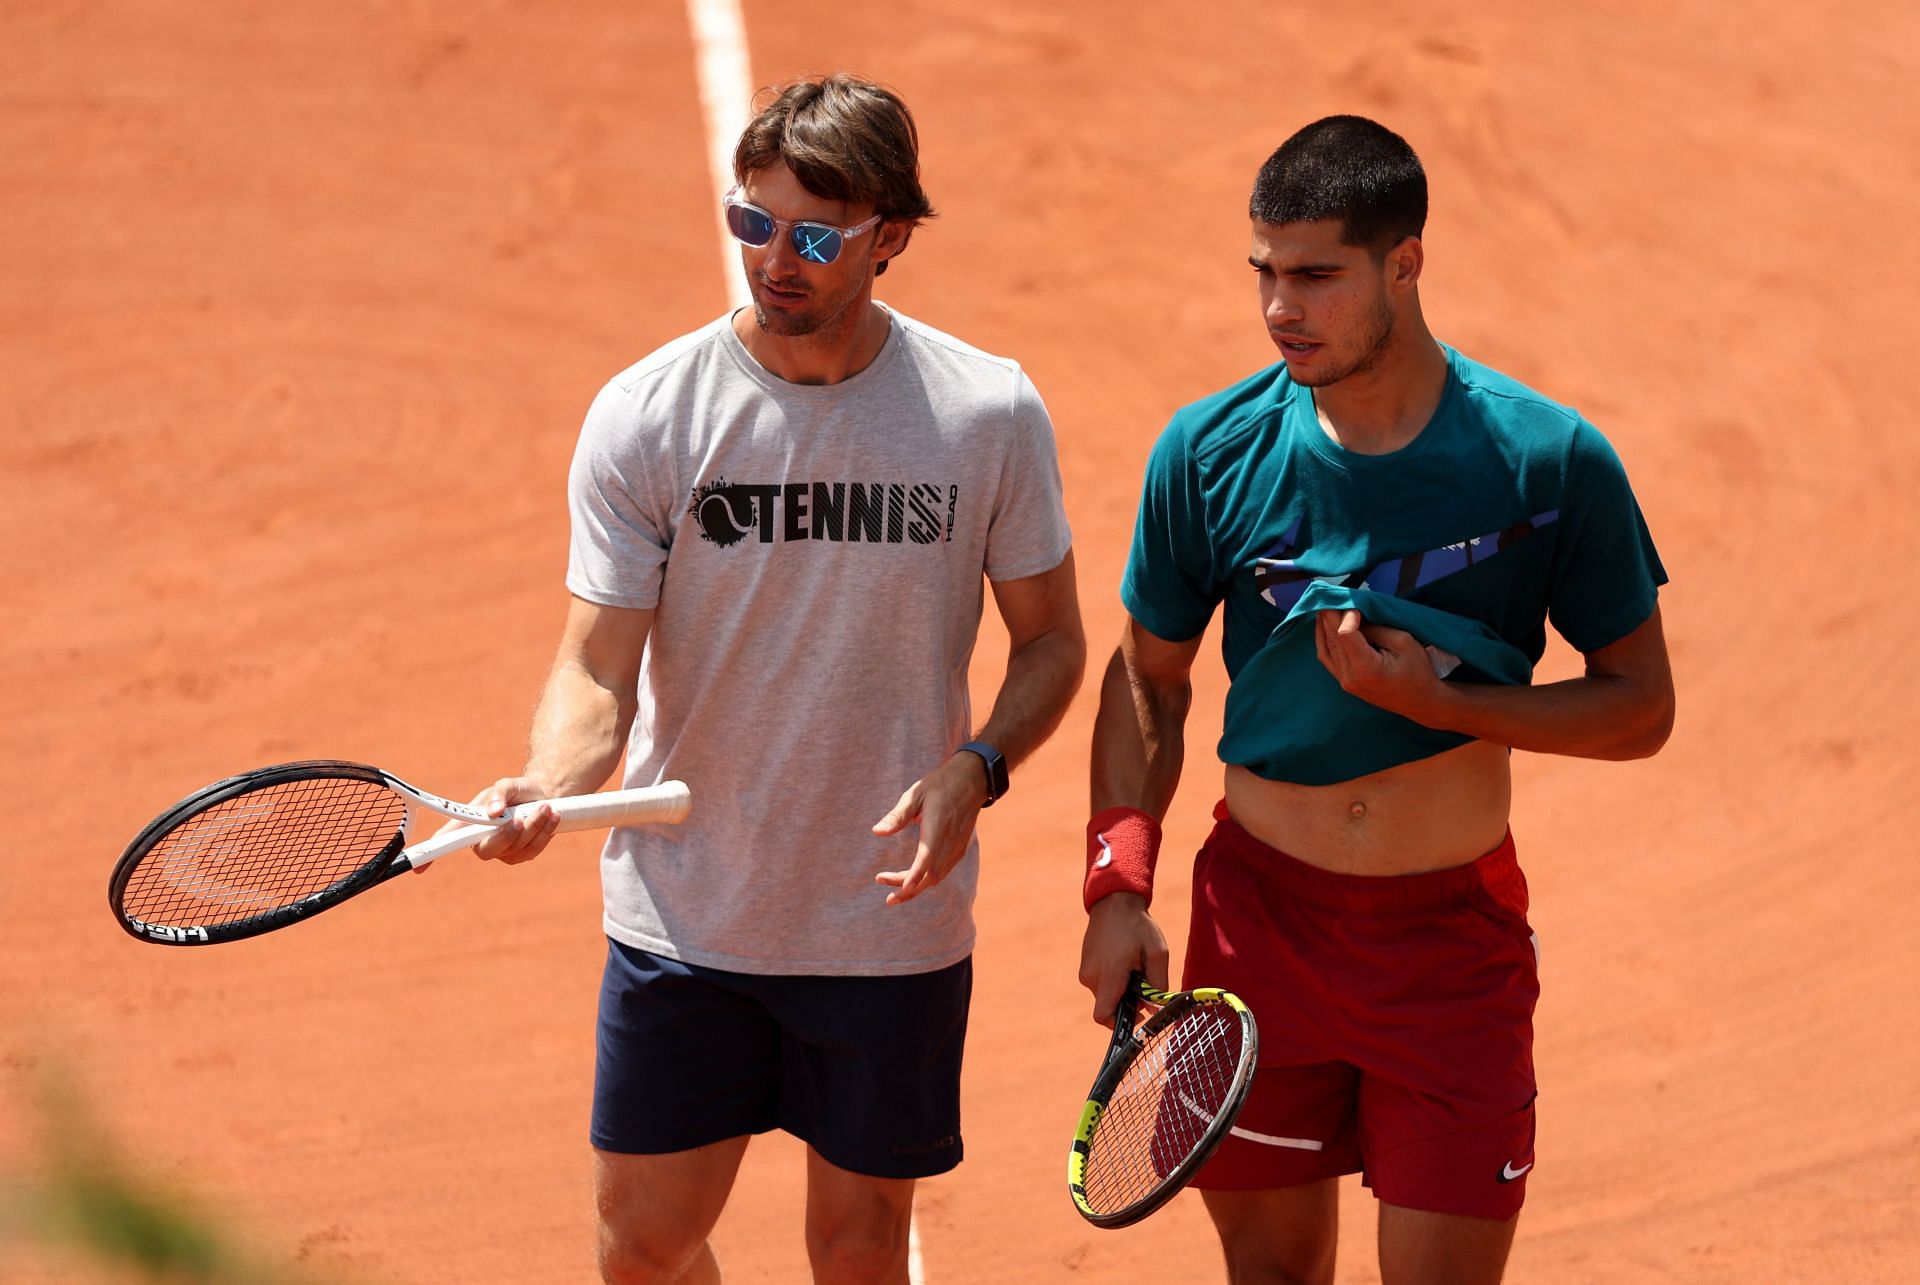 Carlos Alcaraz (right) at the 2022 French Open - Previews